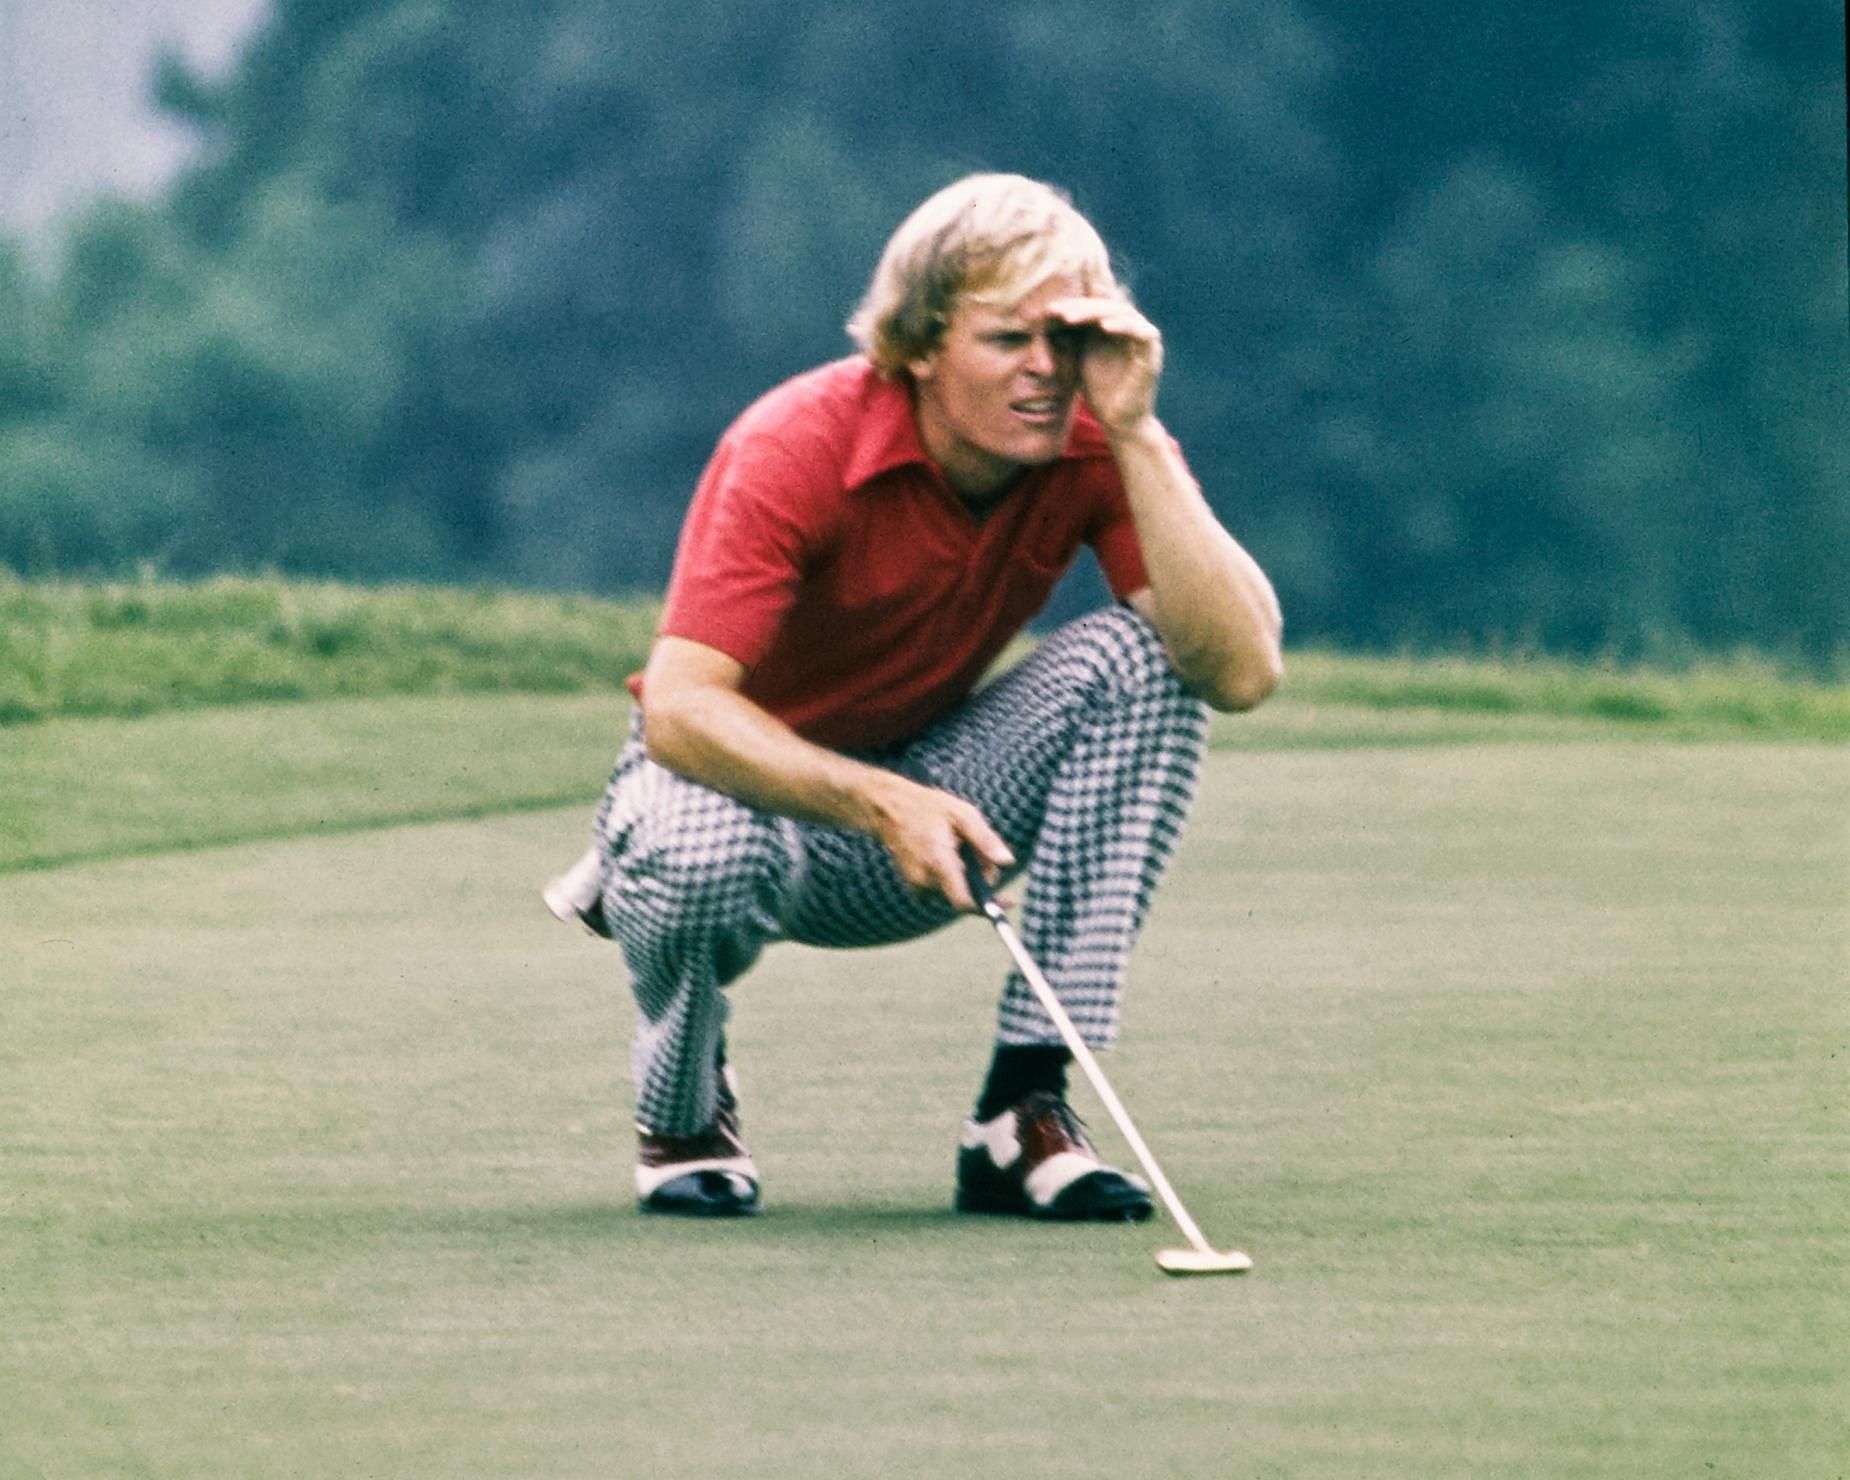 Johnny Miller playing at the 1973 US Open, which he eventually won (Image via Golf Digest).